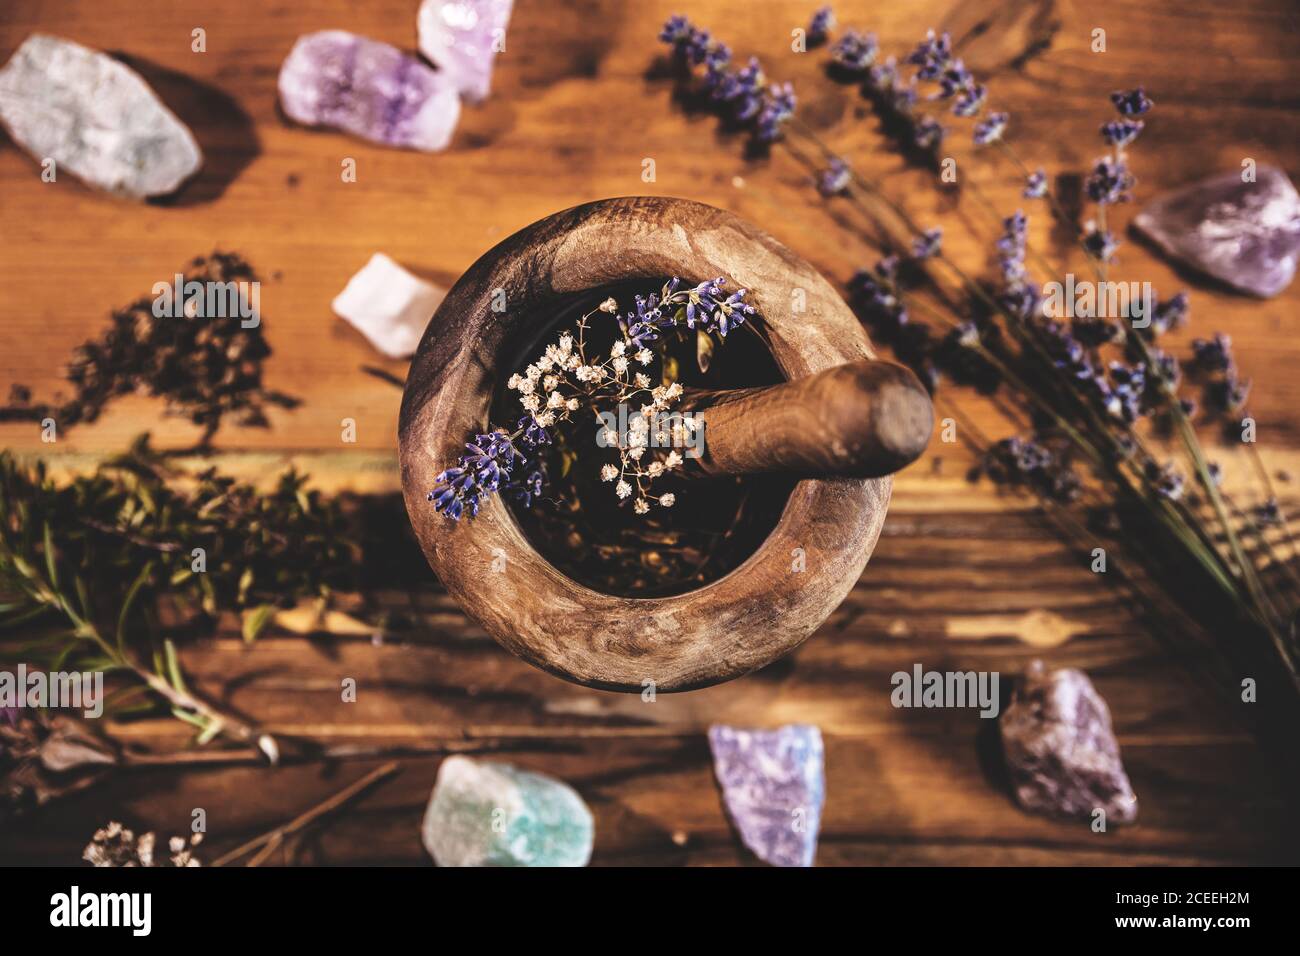 Pulverizing healing herbs and flowers with the mortar, esoteric ingredients for a therapy, flatlay Stock Photo